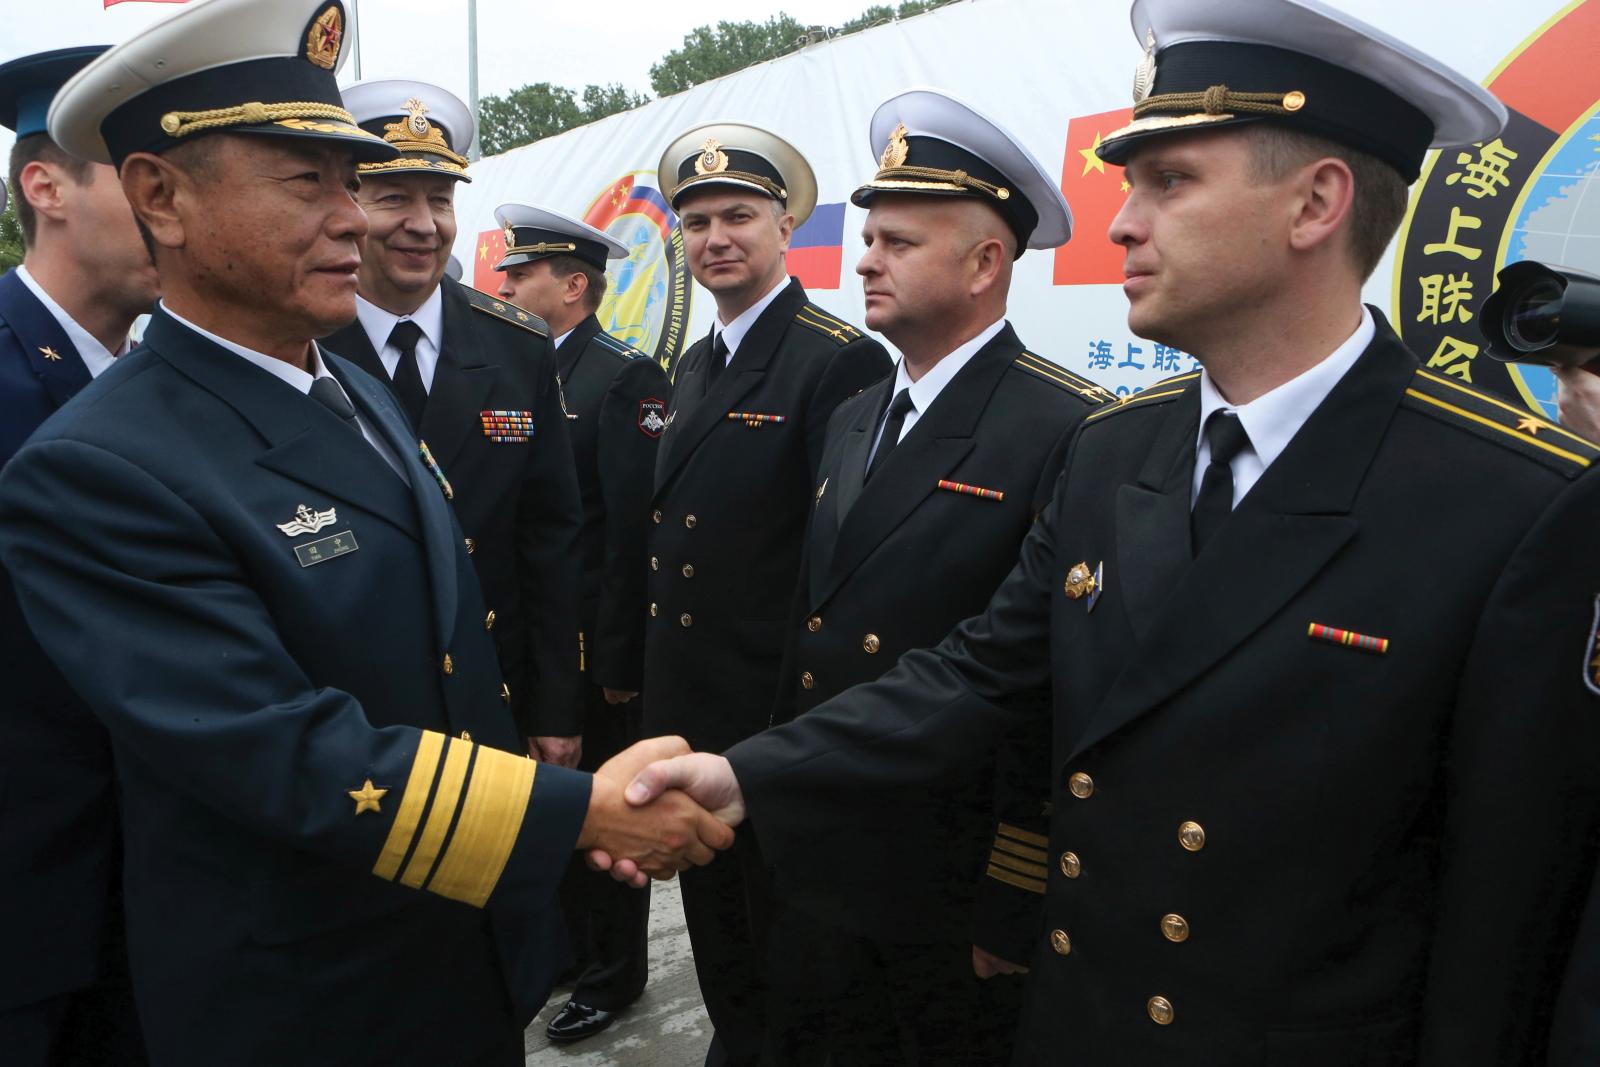 Chinese and Russian navy commanders greet each other